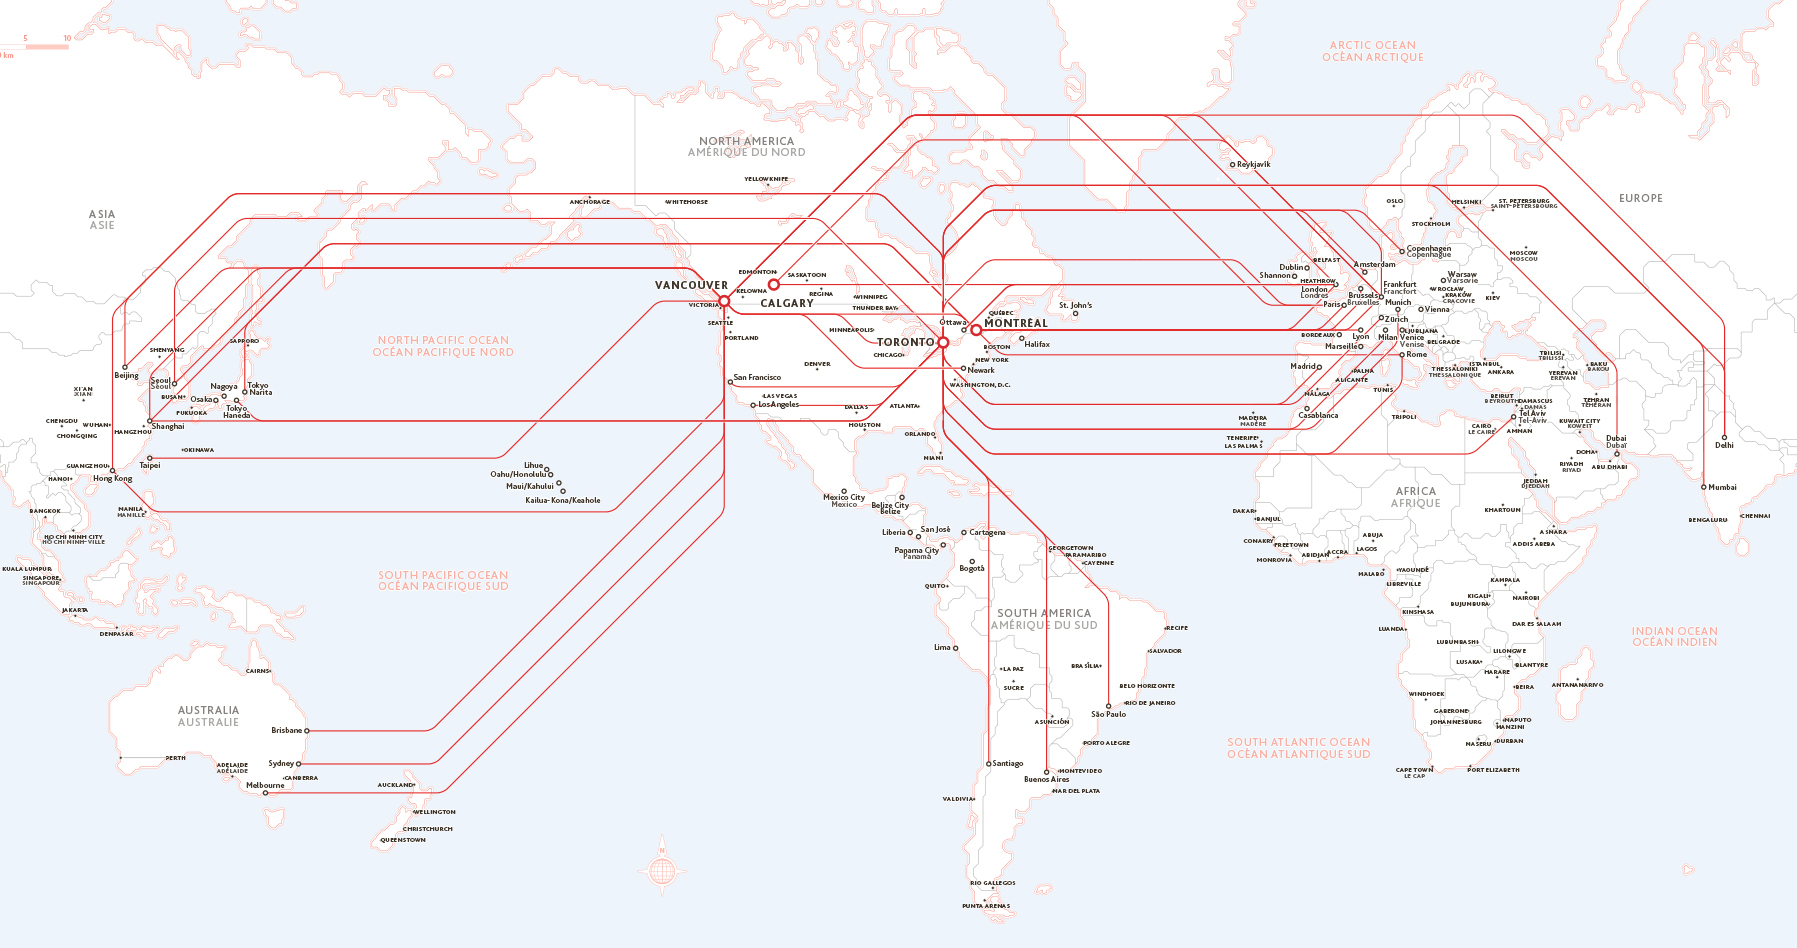 Network extension map